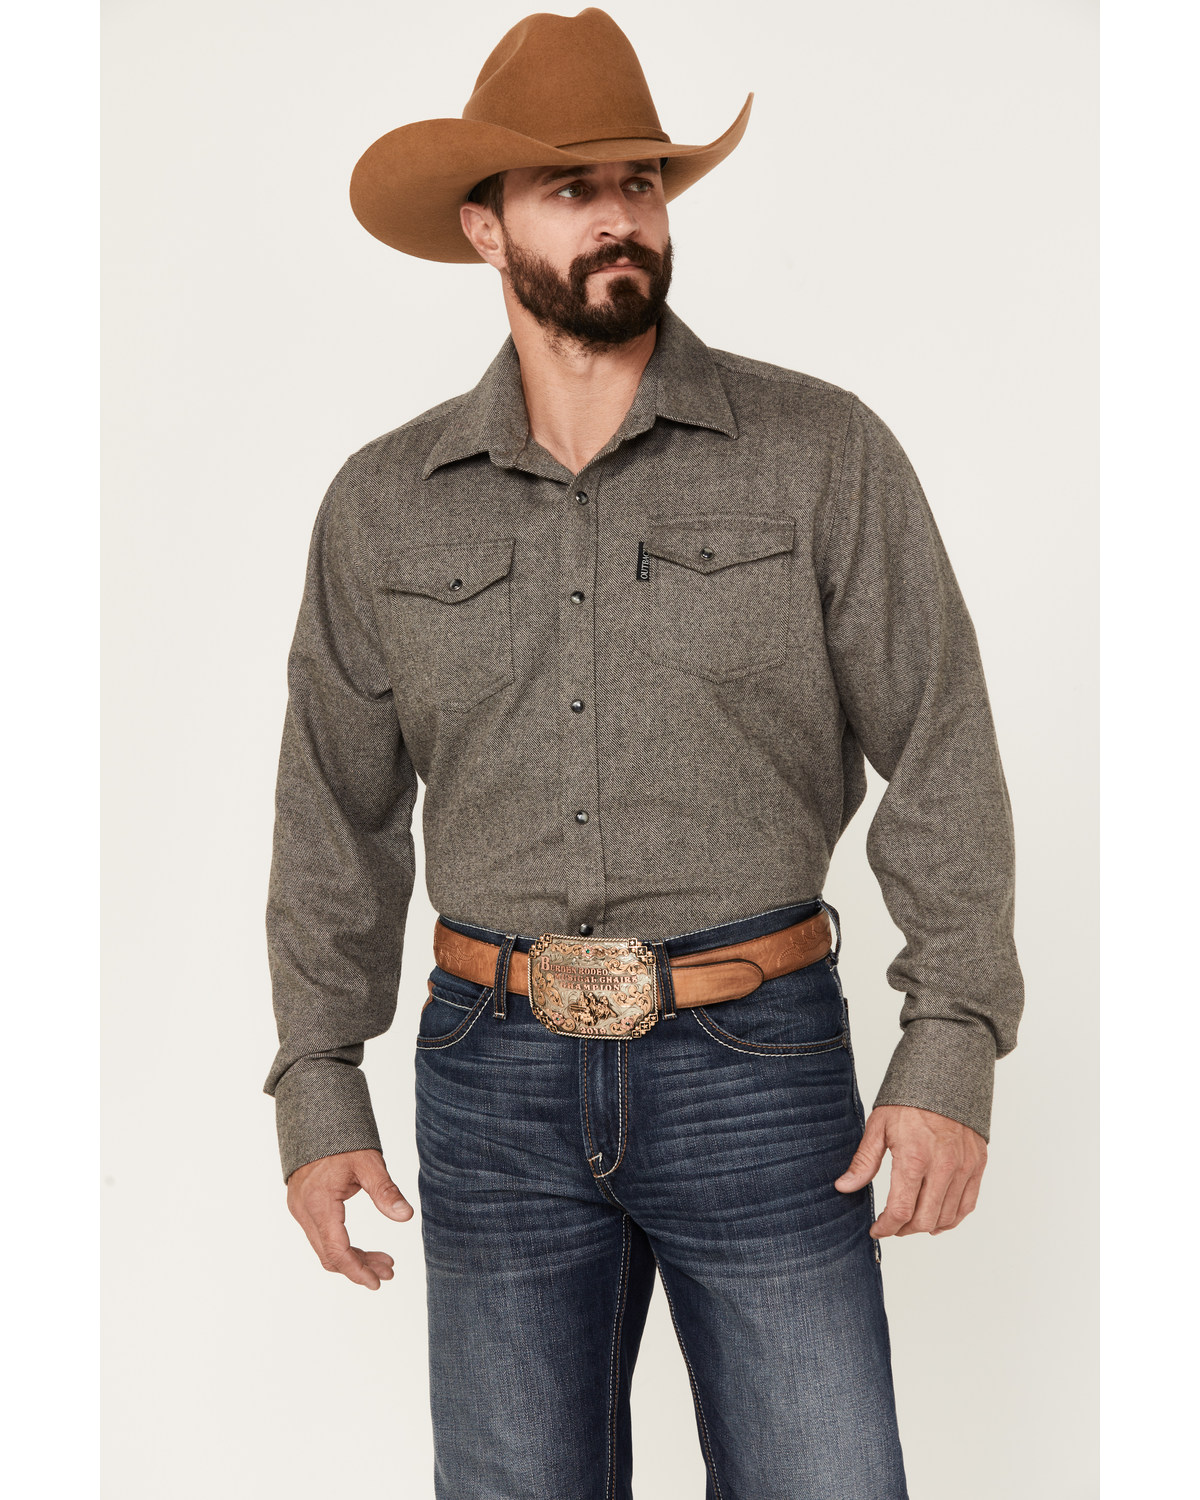 Outback Trading Co Men's Declan Heathered Long Sleeve Snap Shirt